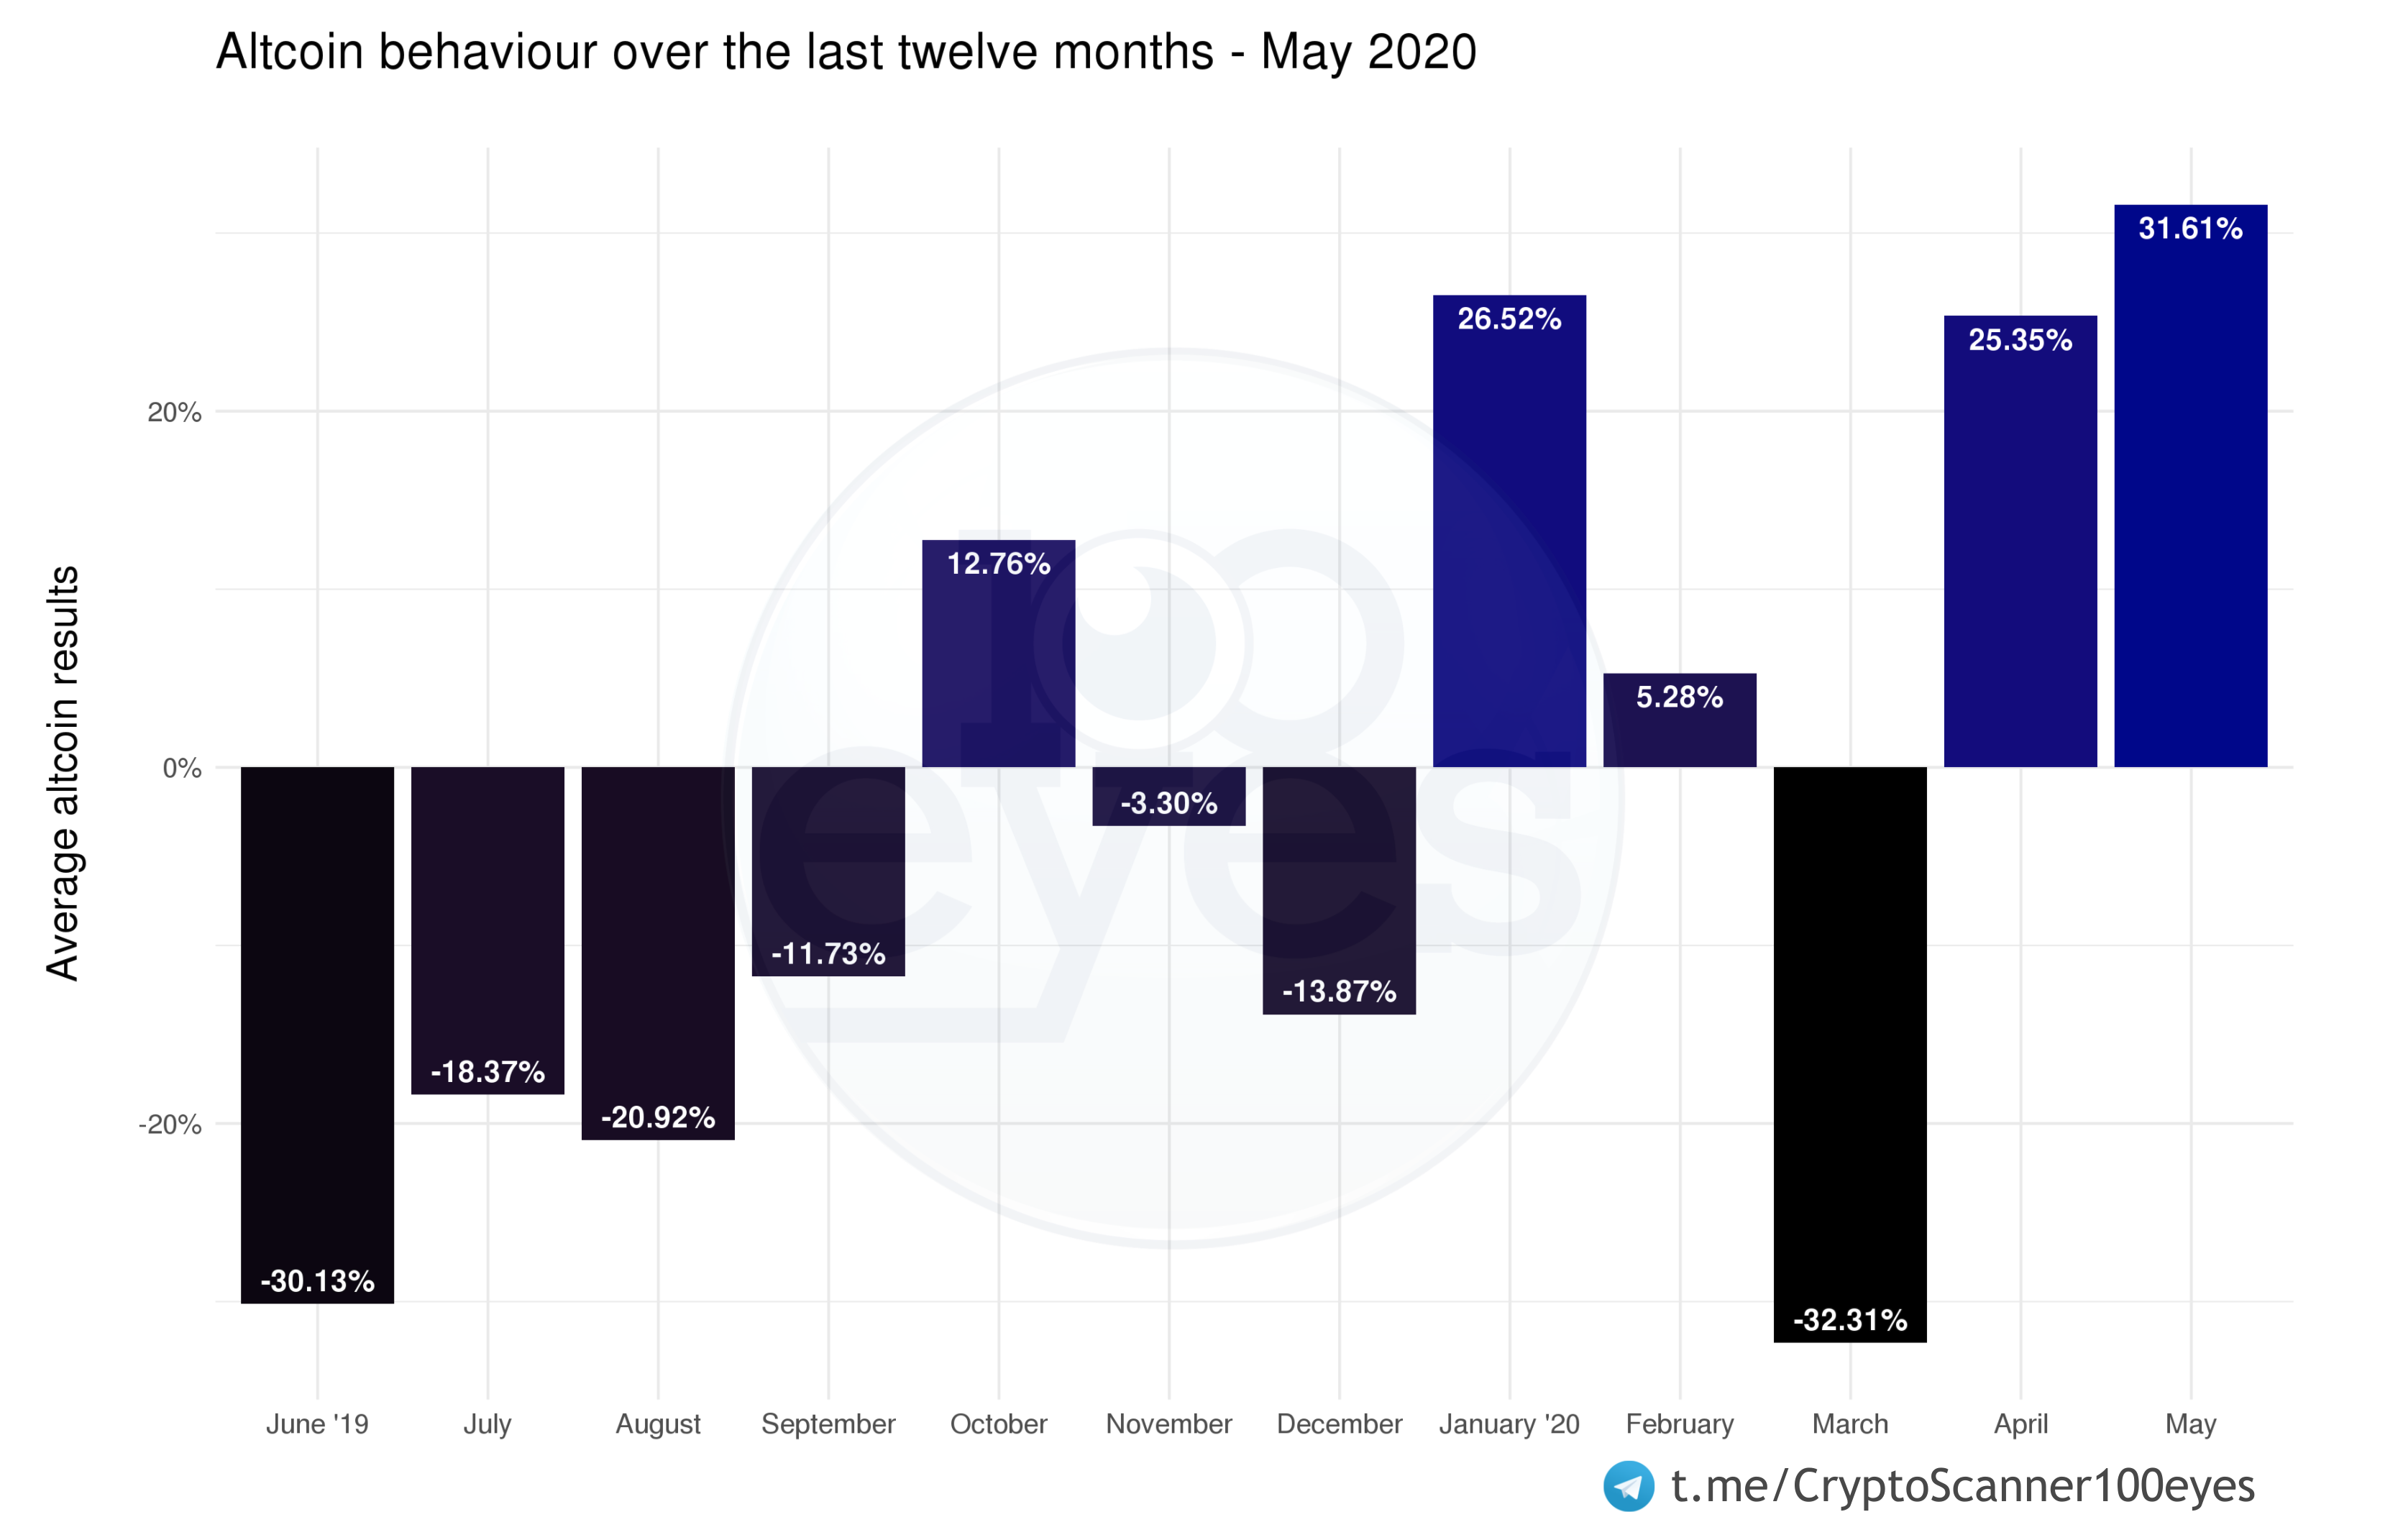 After the 36% gain in April, Bitcoin gained another 8.1% in May. Altcoins also performed very well and gained 31.61%! Overall 90.3% of all altcoins increased.